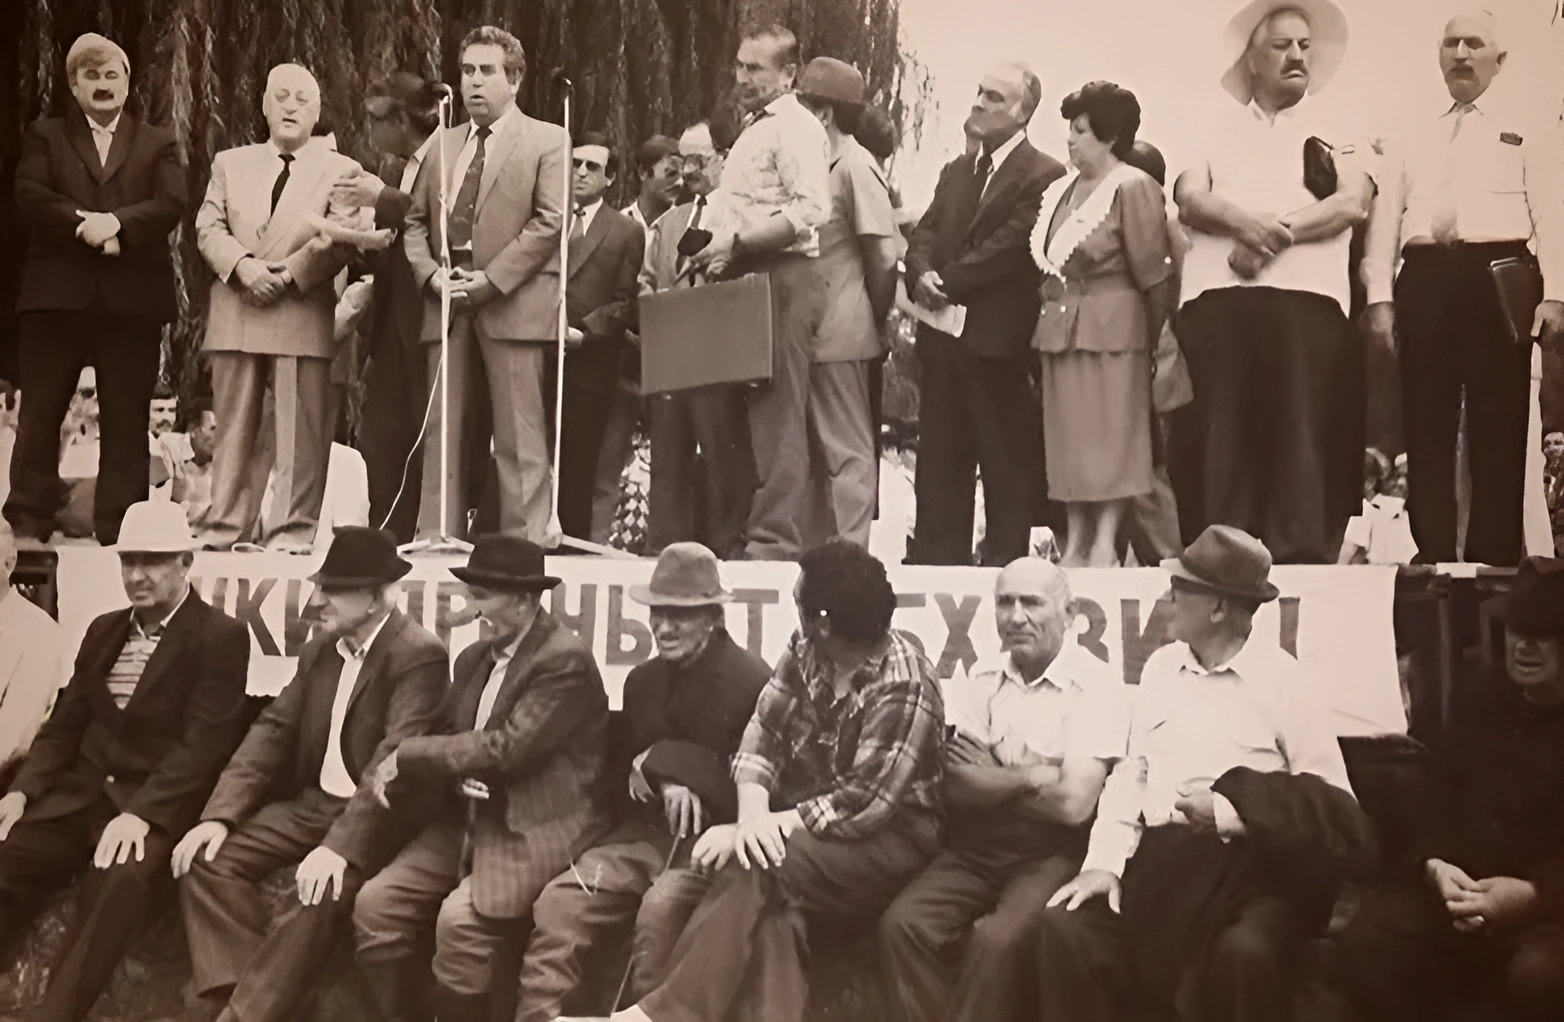 Yury Kalmykov at a rally in support of Abkhazia on the Abkhaz square in the city of Nalchik, Kabardino-Balkaria, 1992